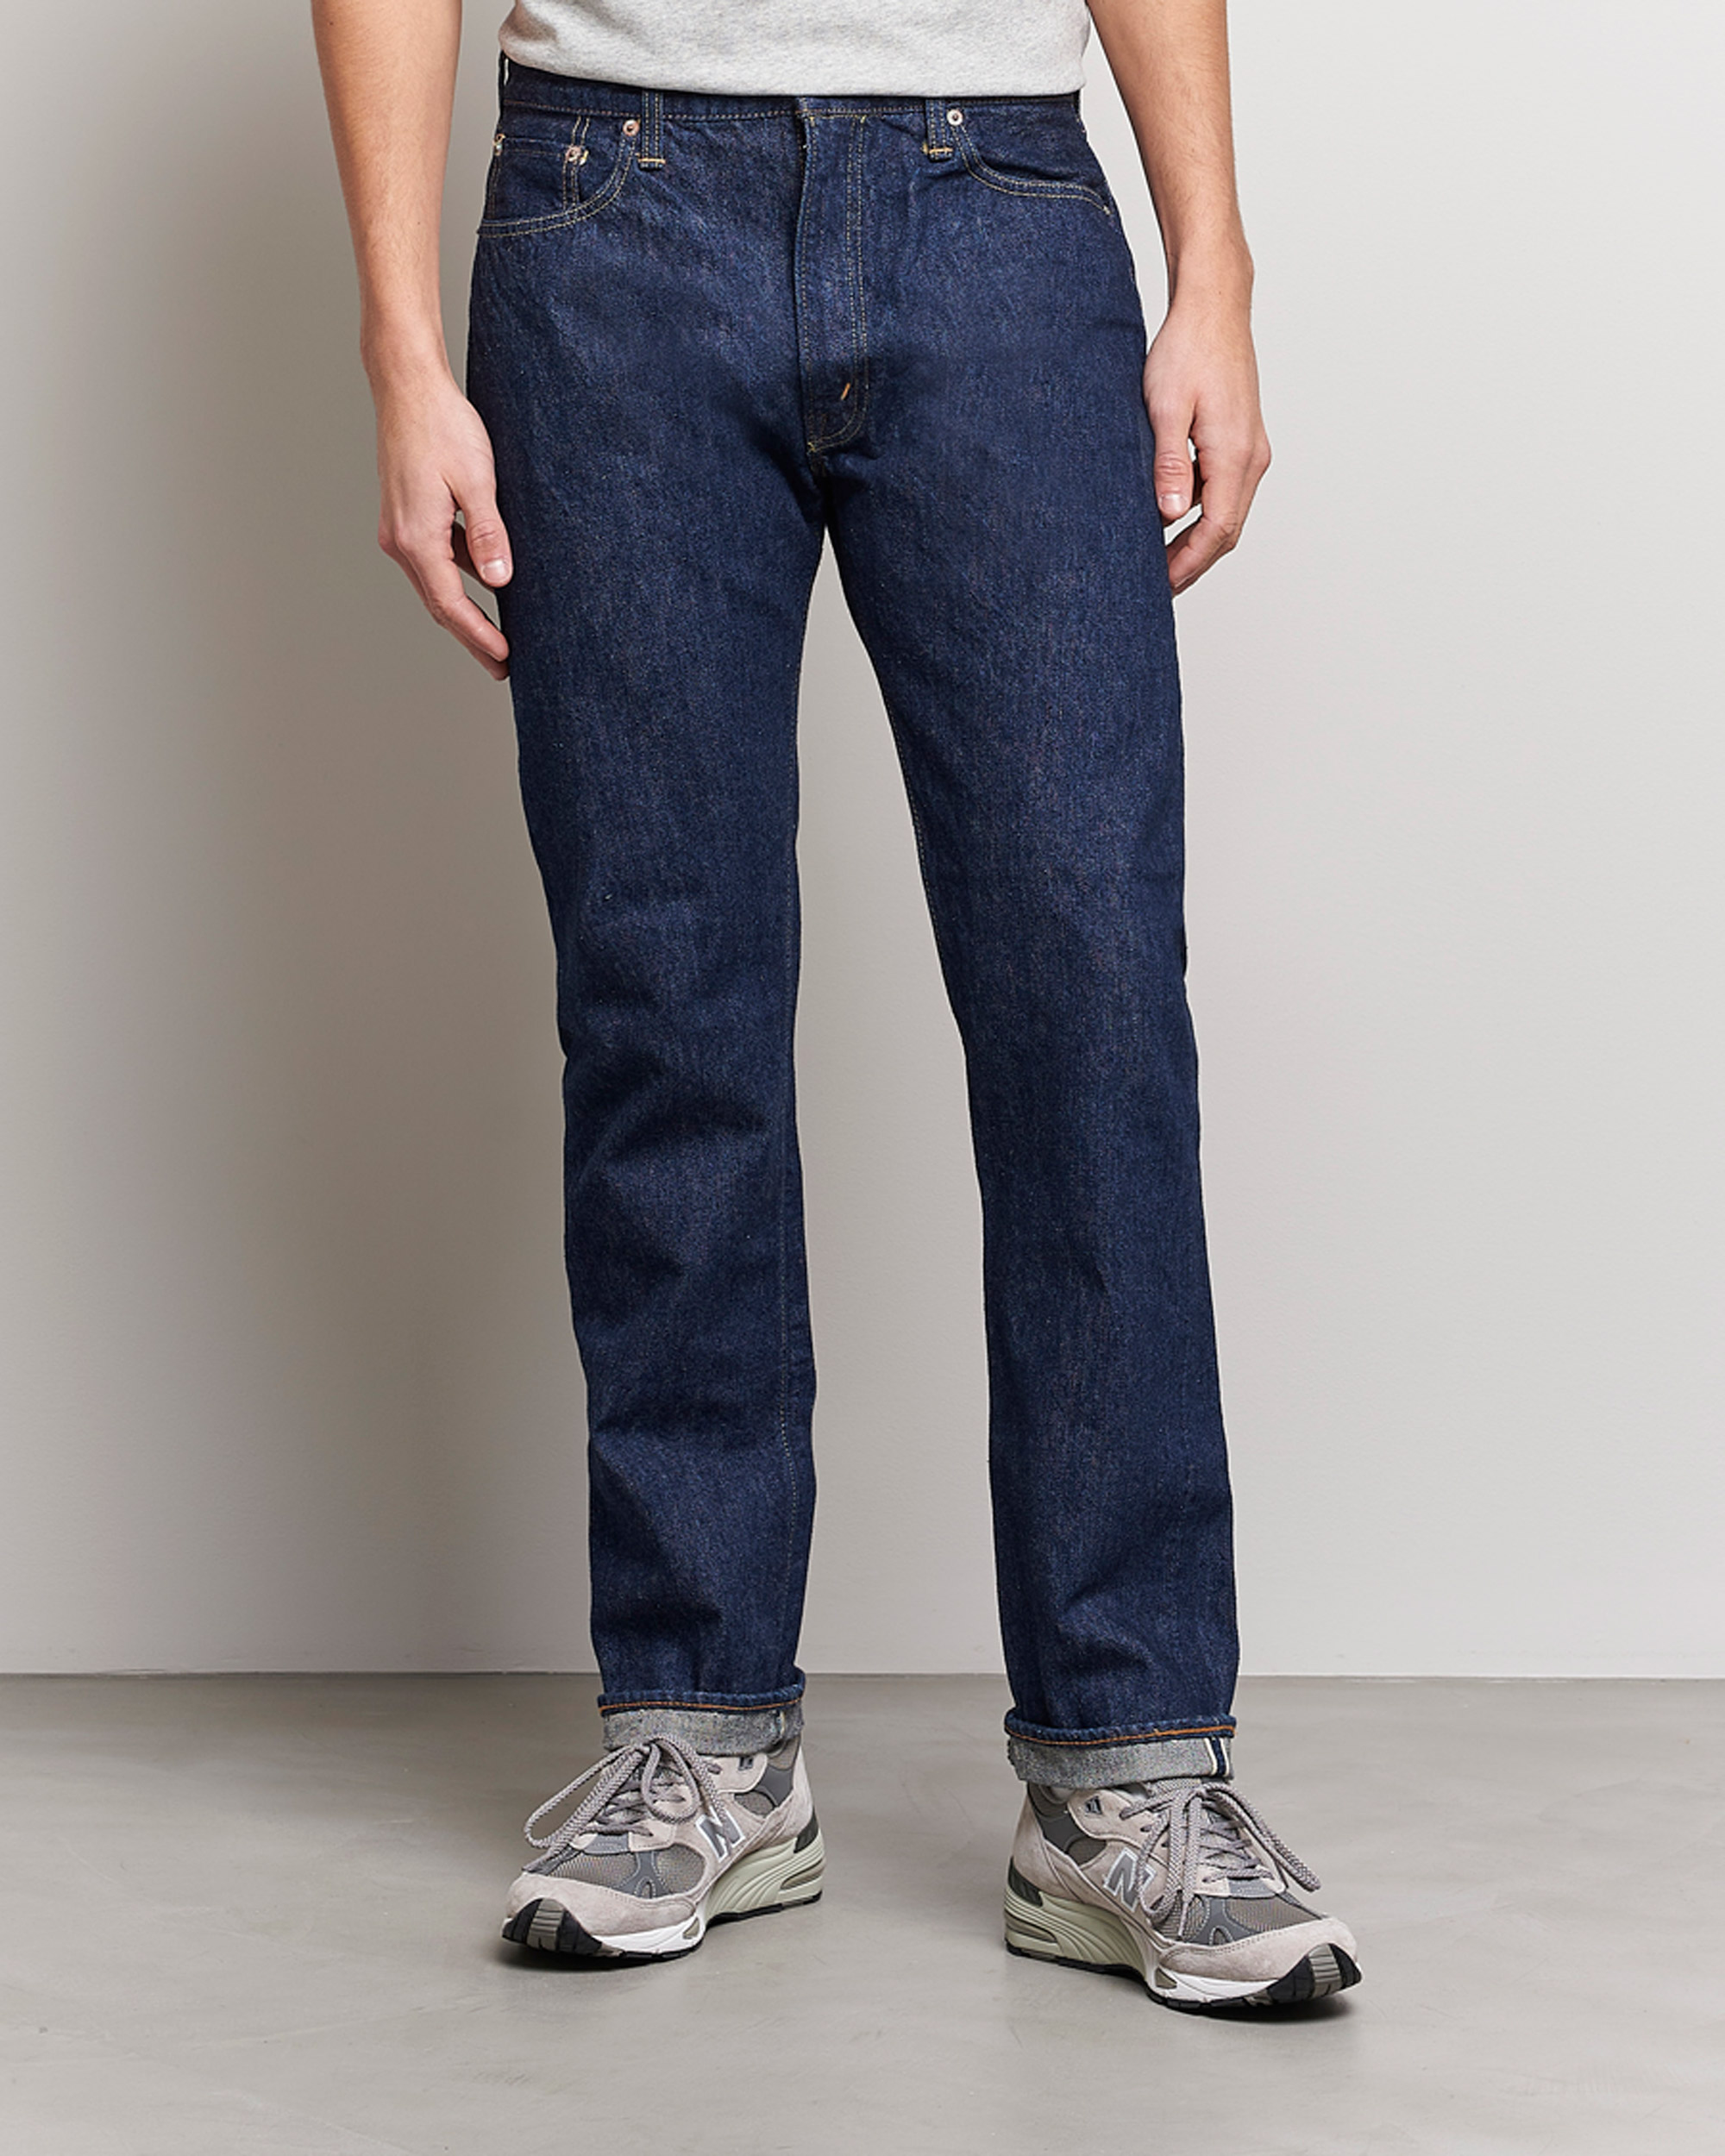 Homme | Jeans | orSlow | Tapered Fit 107 Selvedge Jeans One Wash